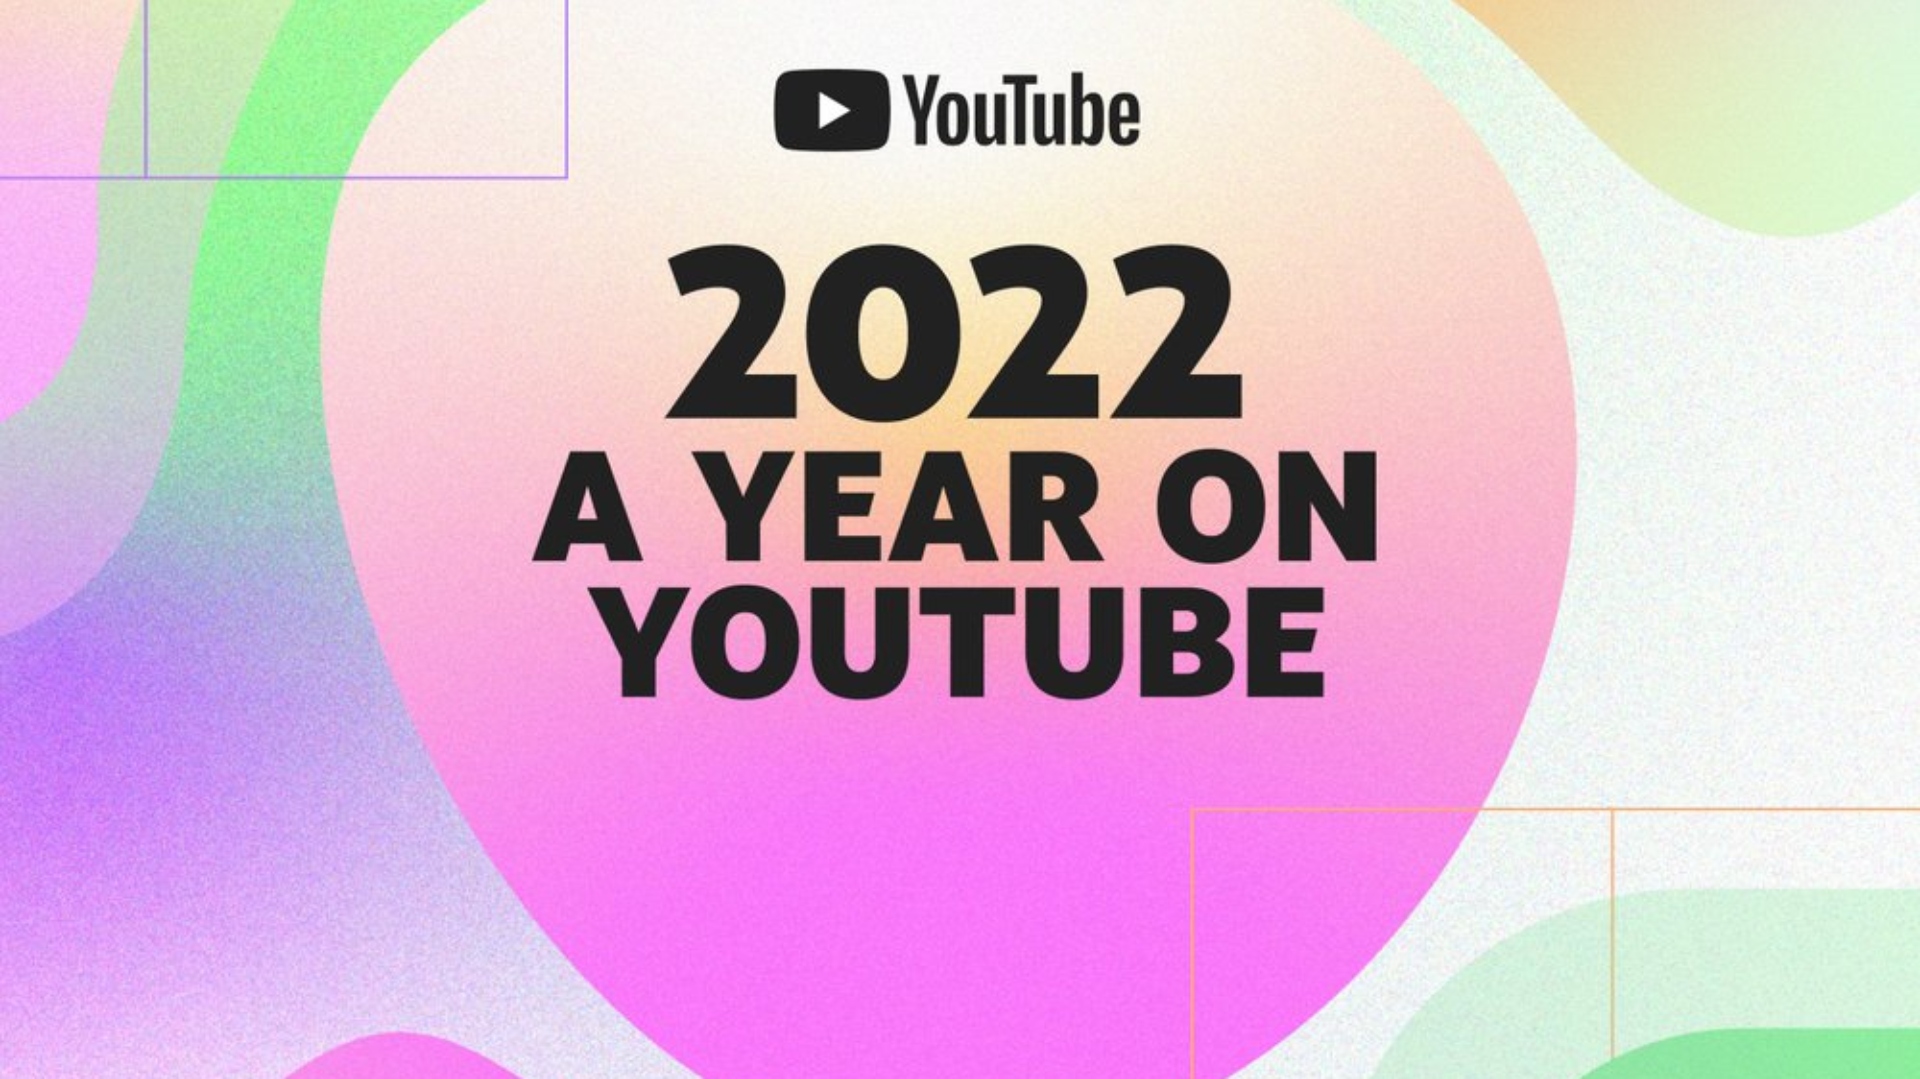 These were the live YouTube videos of 2022 thumbnail